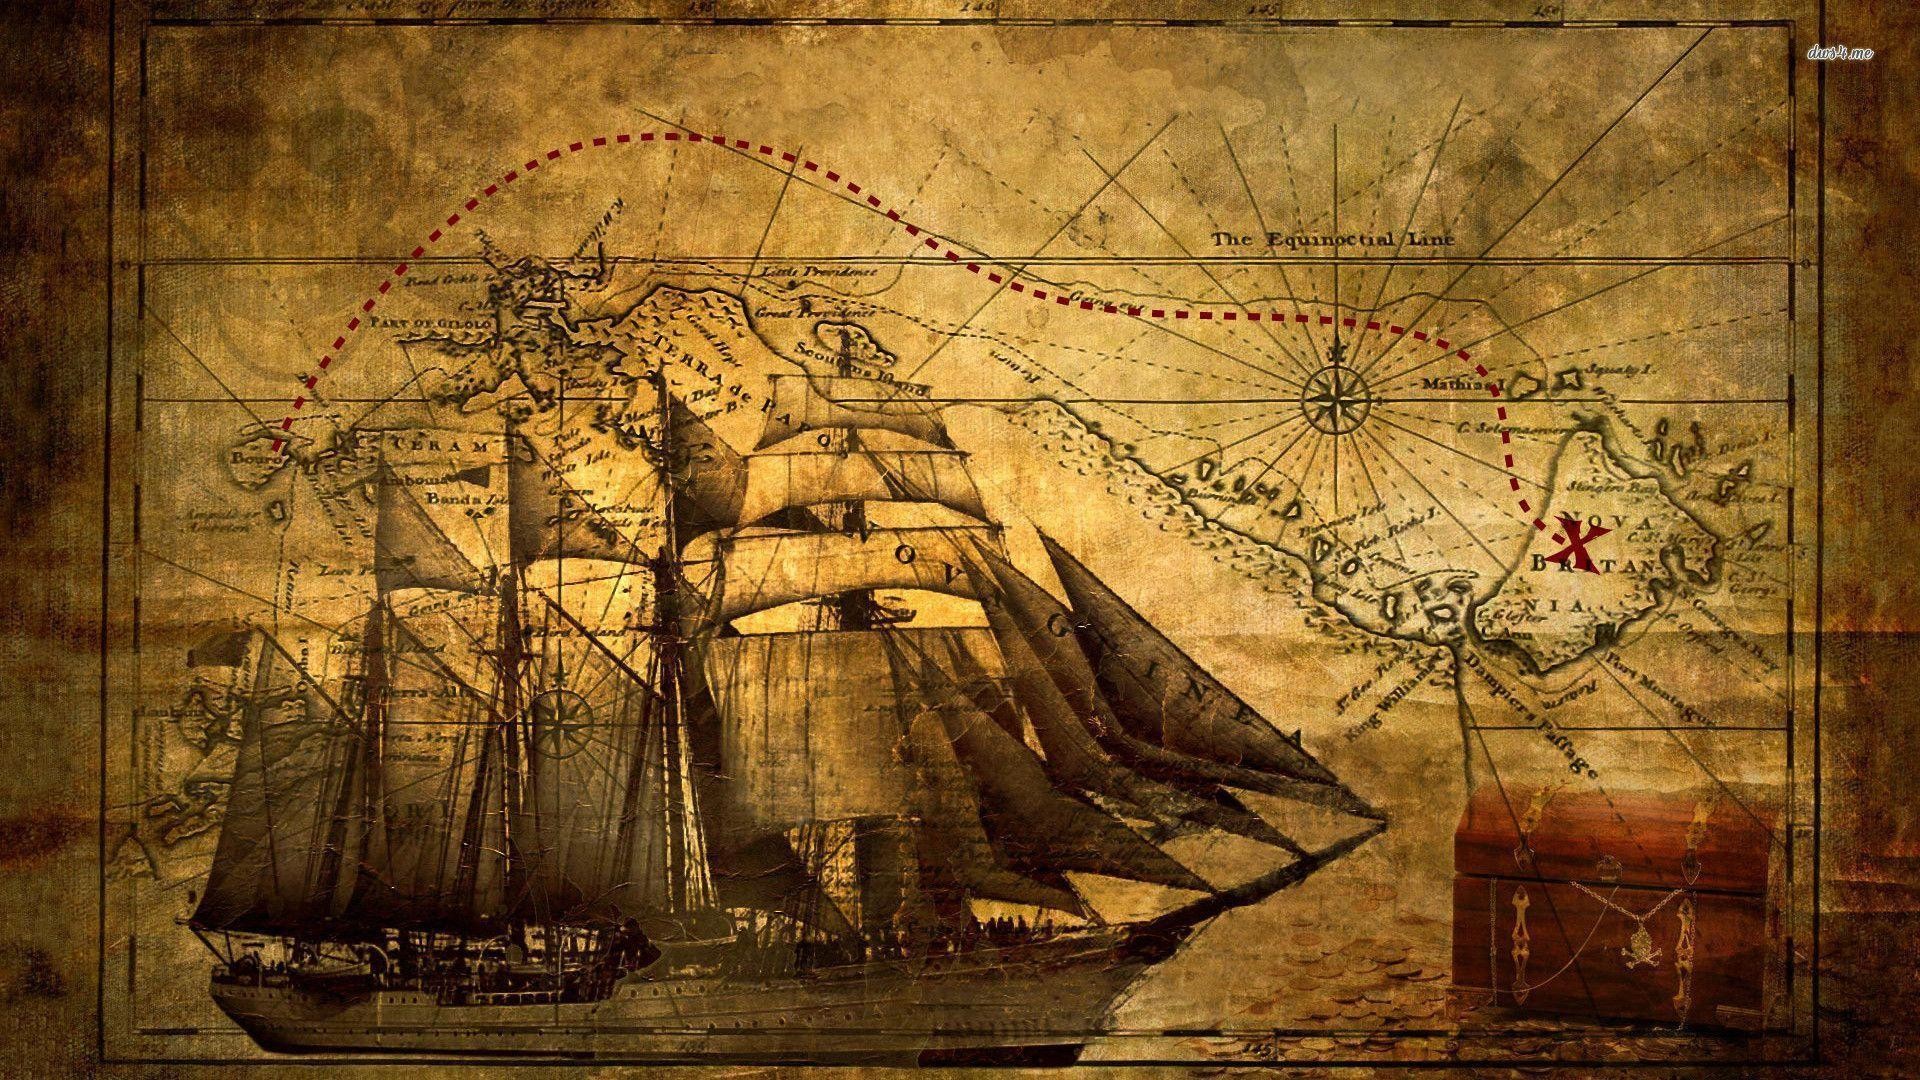 1920x1080 Old ship with map wallpaper - Digital Art wallpapers - #